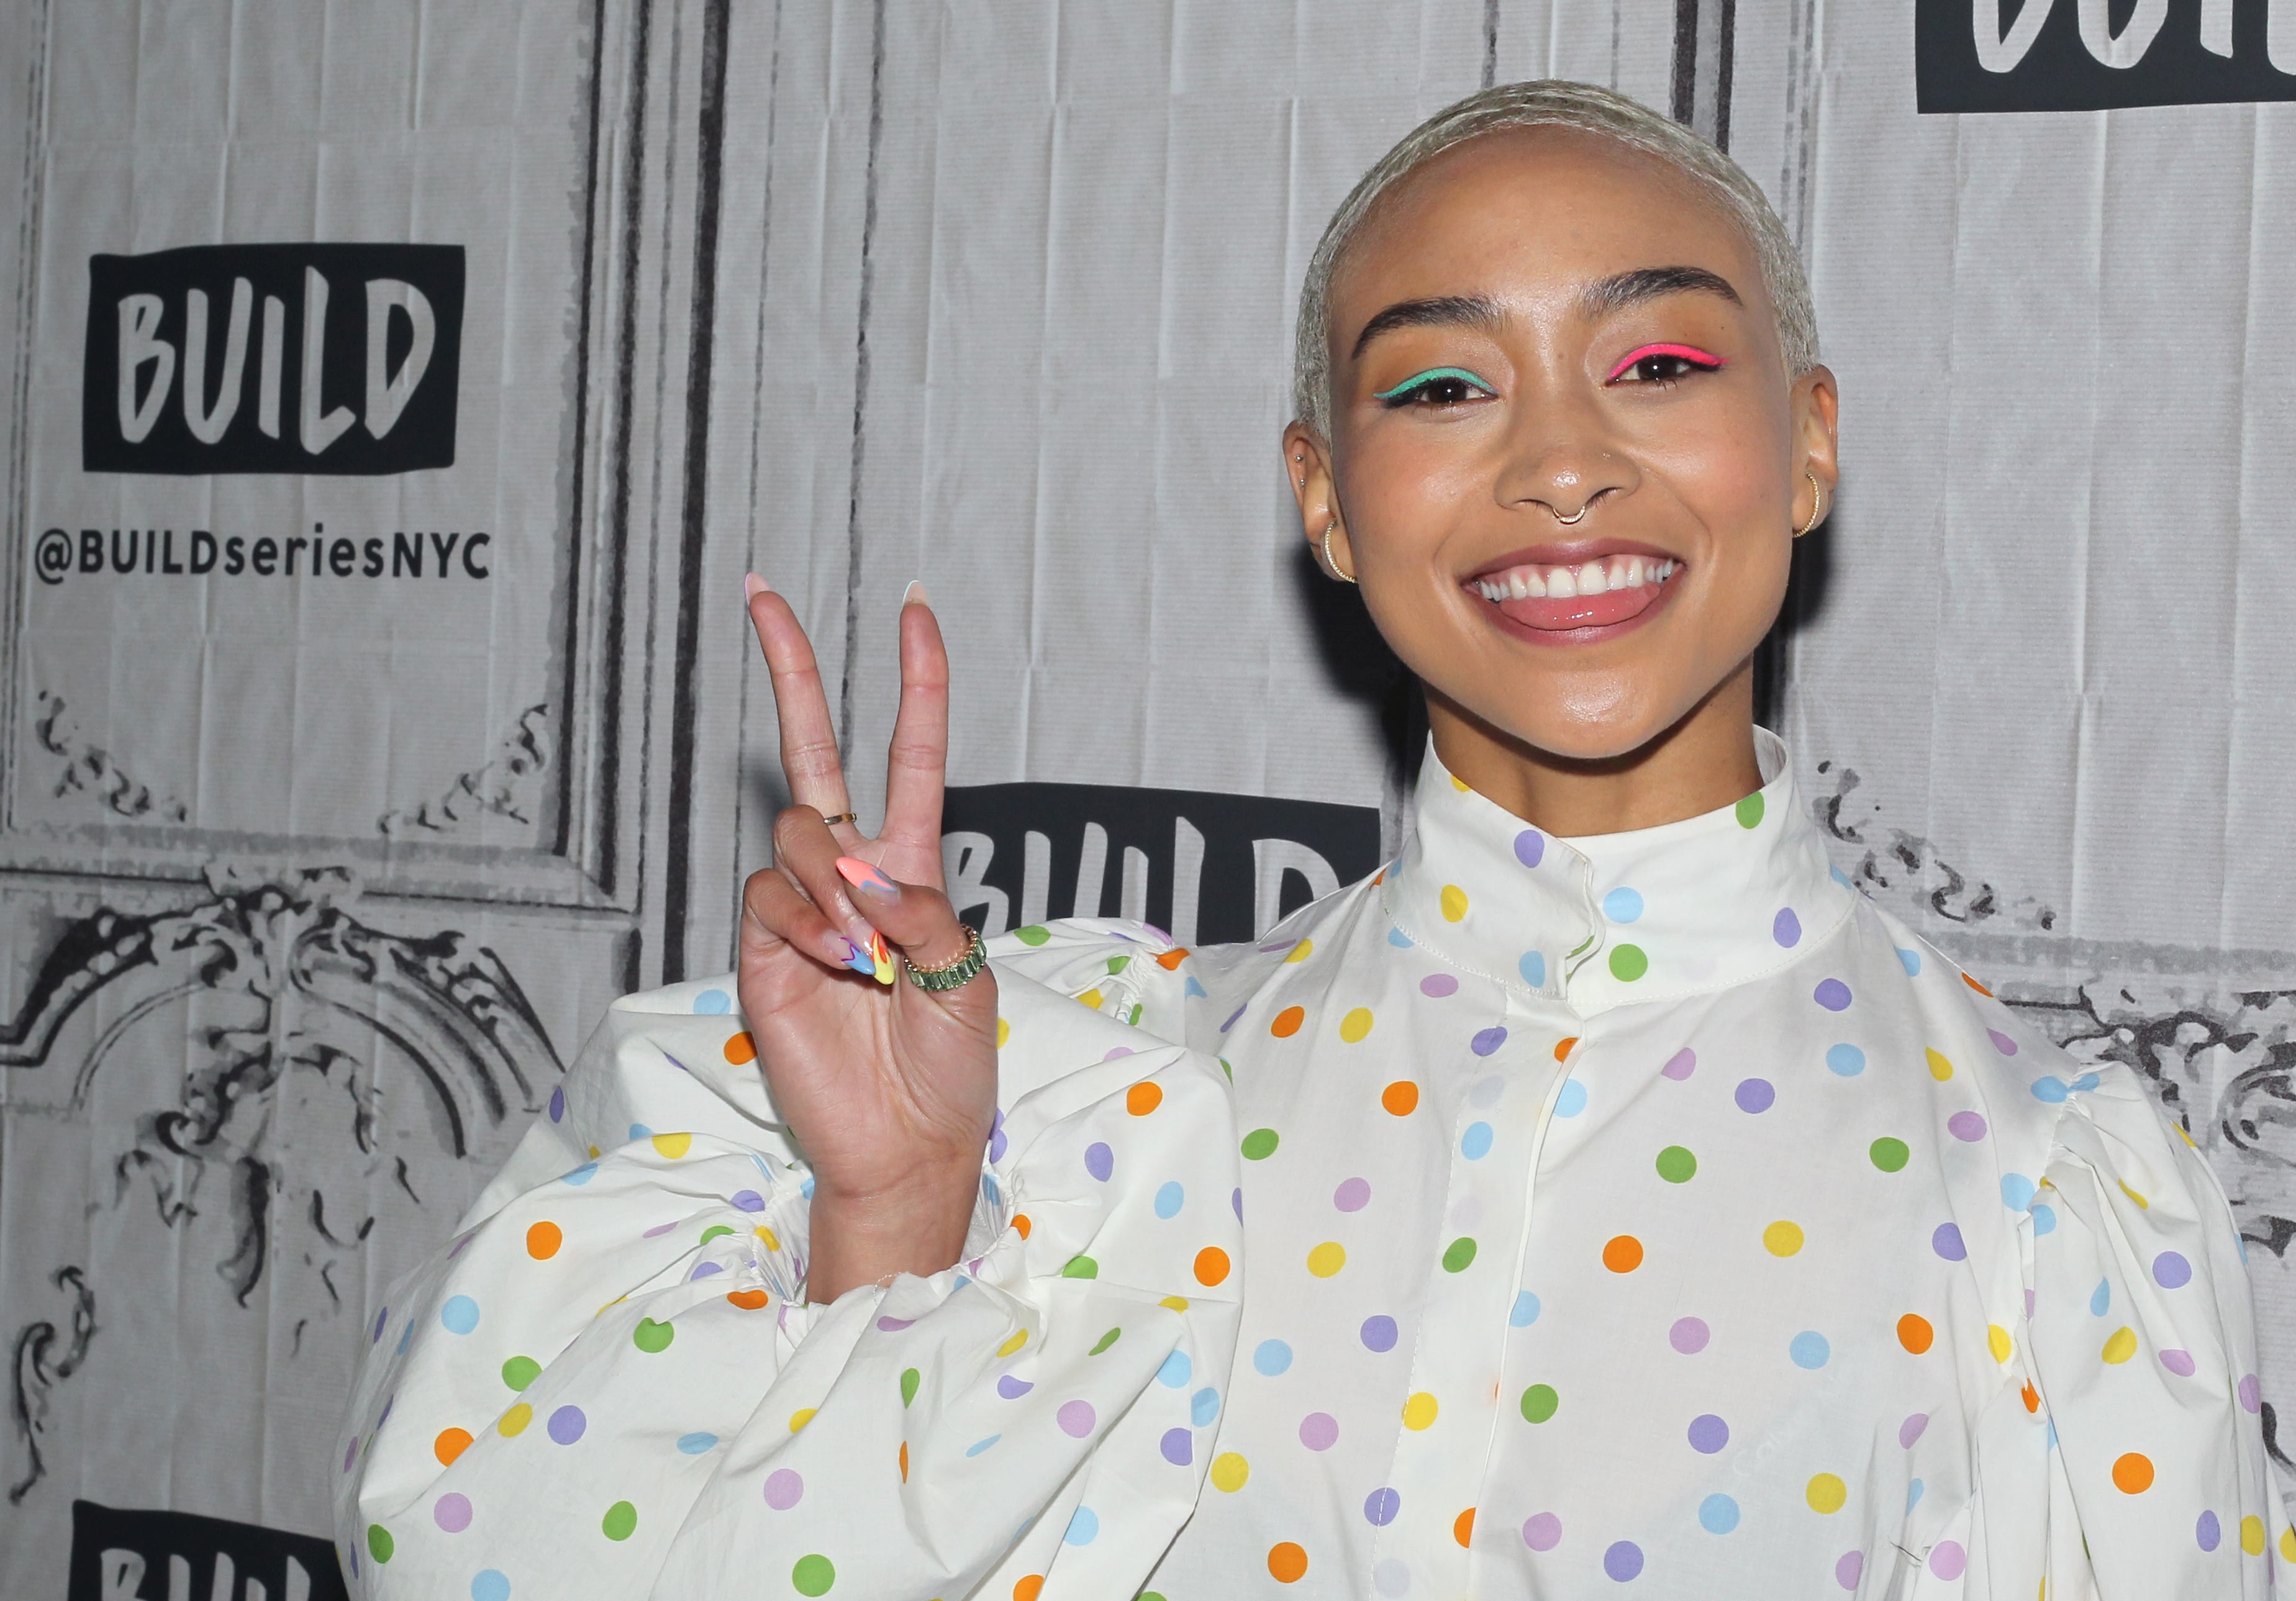 Tati Gabrielle: 15 facts about the You star you probably never